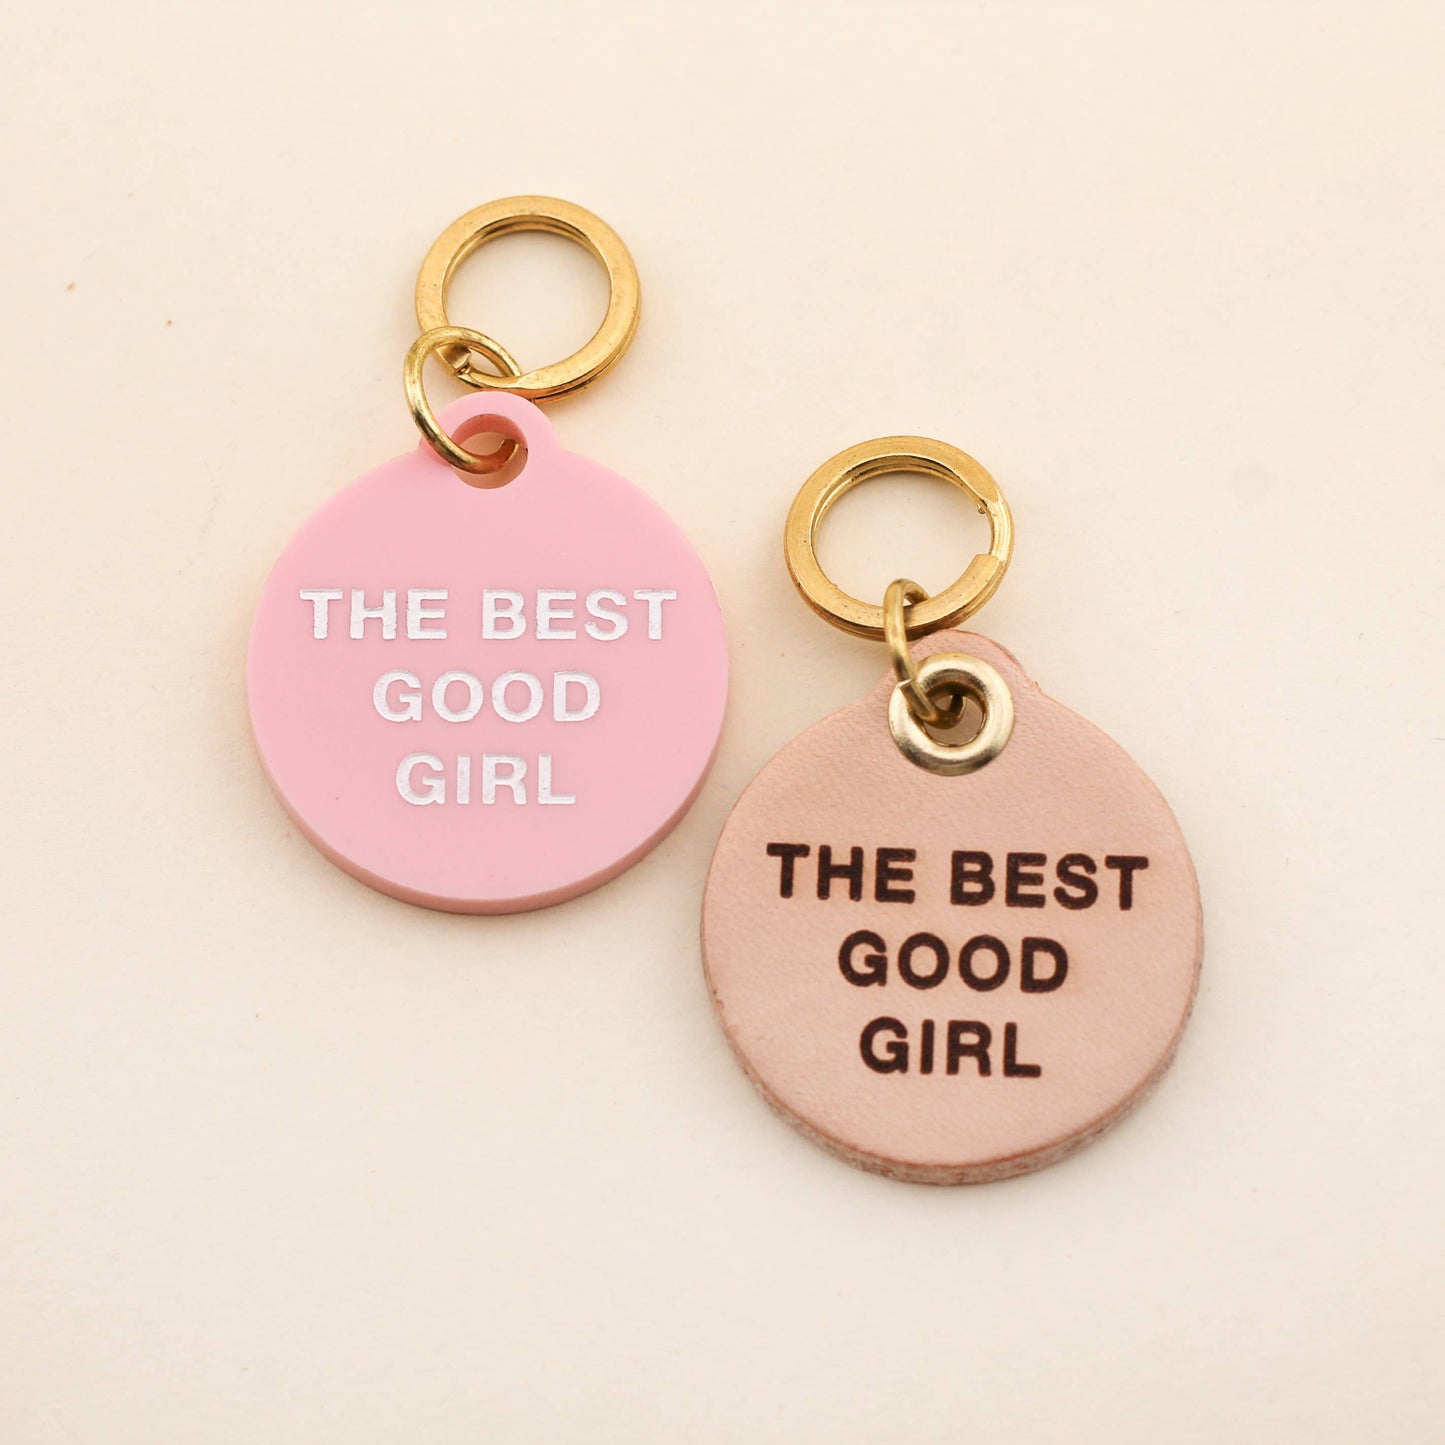 The Best Good Girl Pet Tag: Candy Pink Acrylic